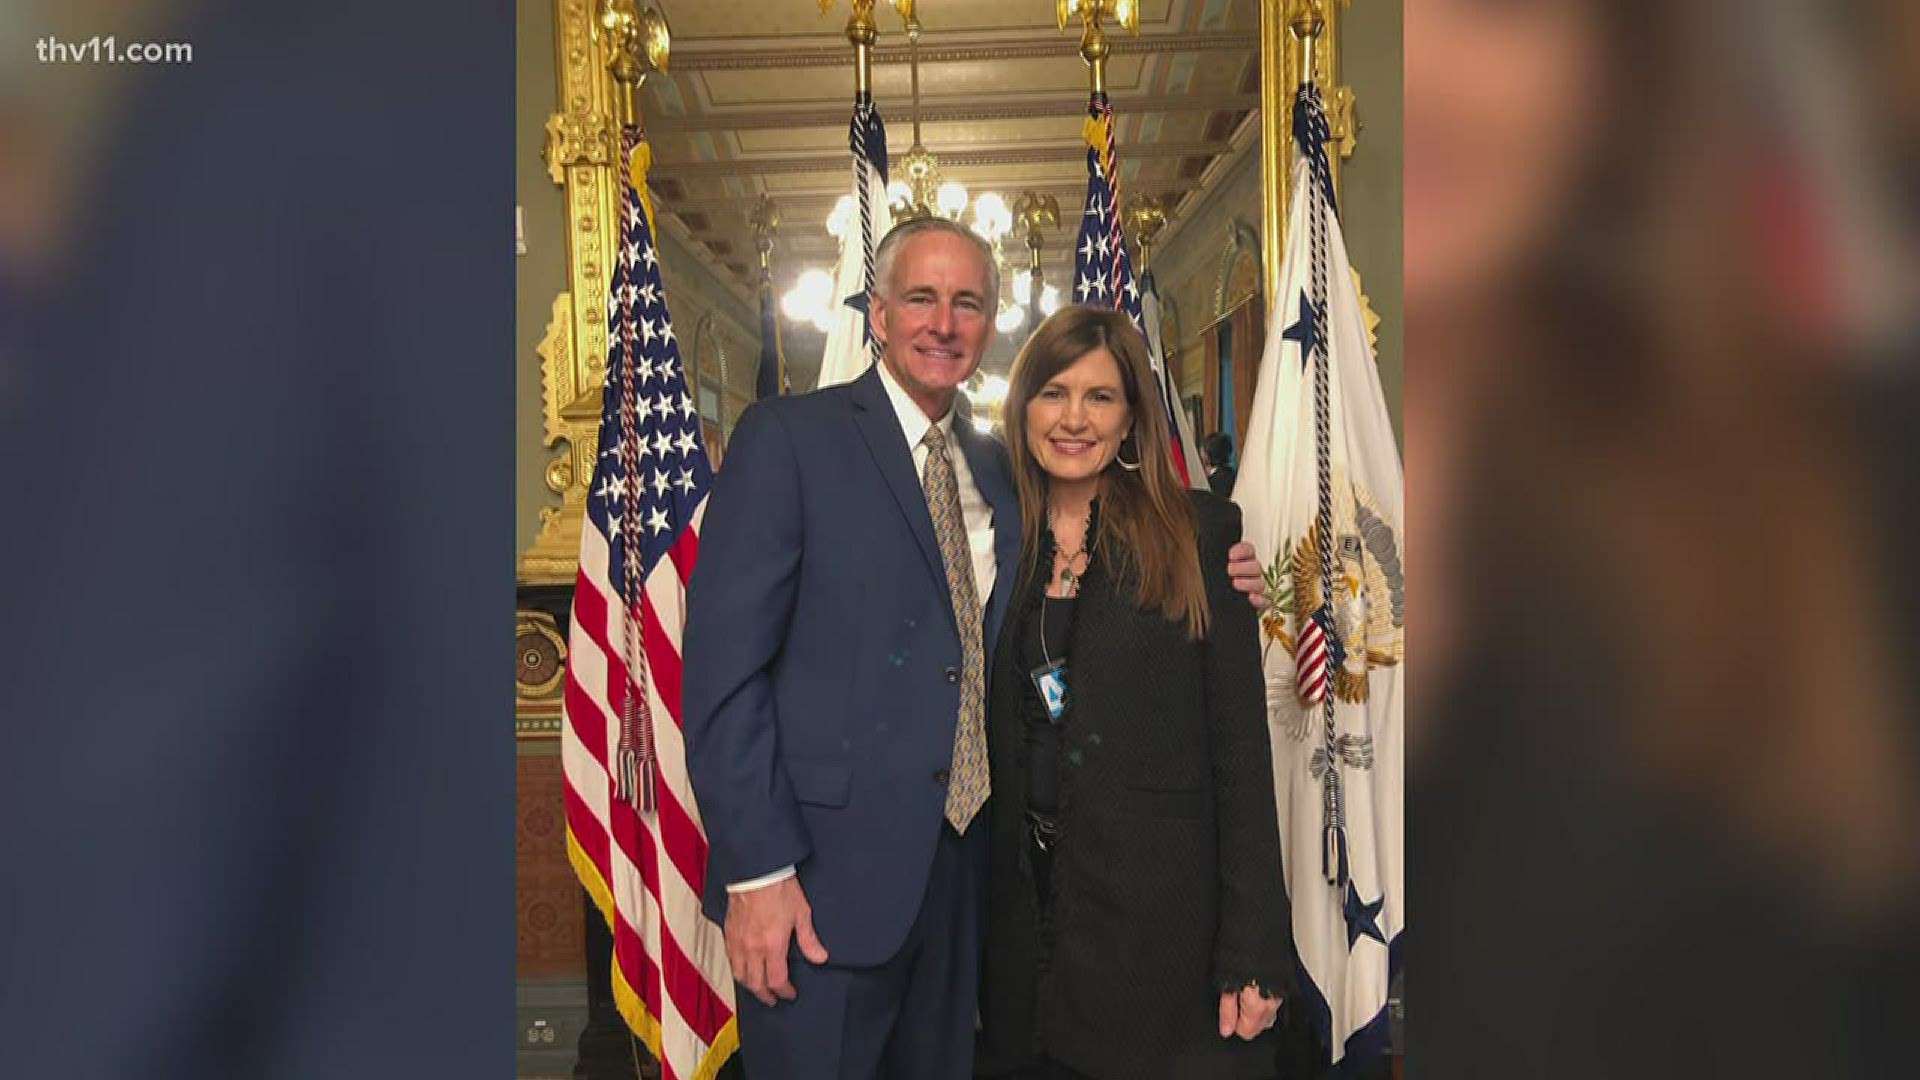 Not only did David and Rachel Mangan recover from COVID-19, but they got the chance to share their story with President Trump and Vice President Pence.